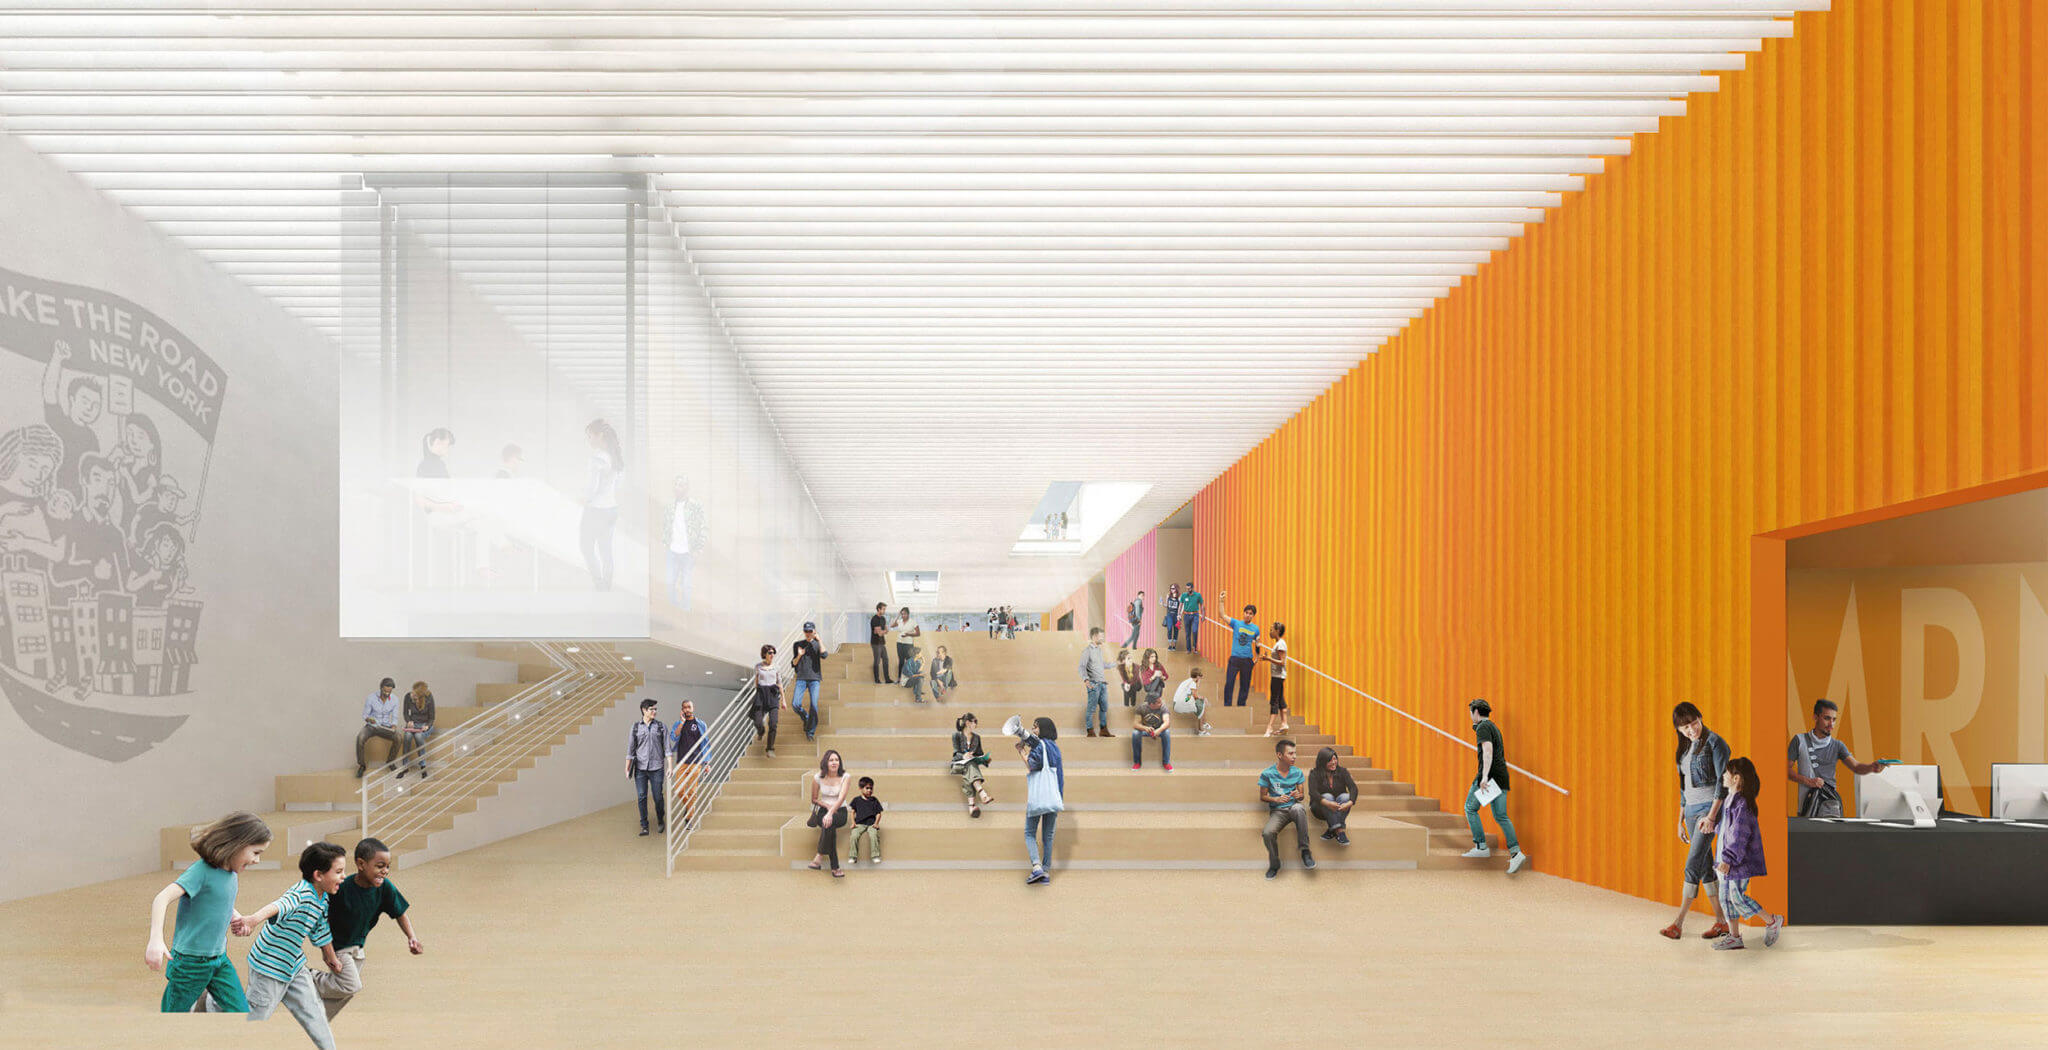 An orange community center with ridged walls and ceiling